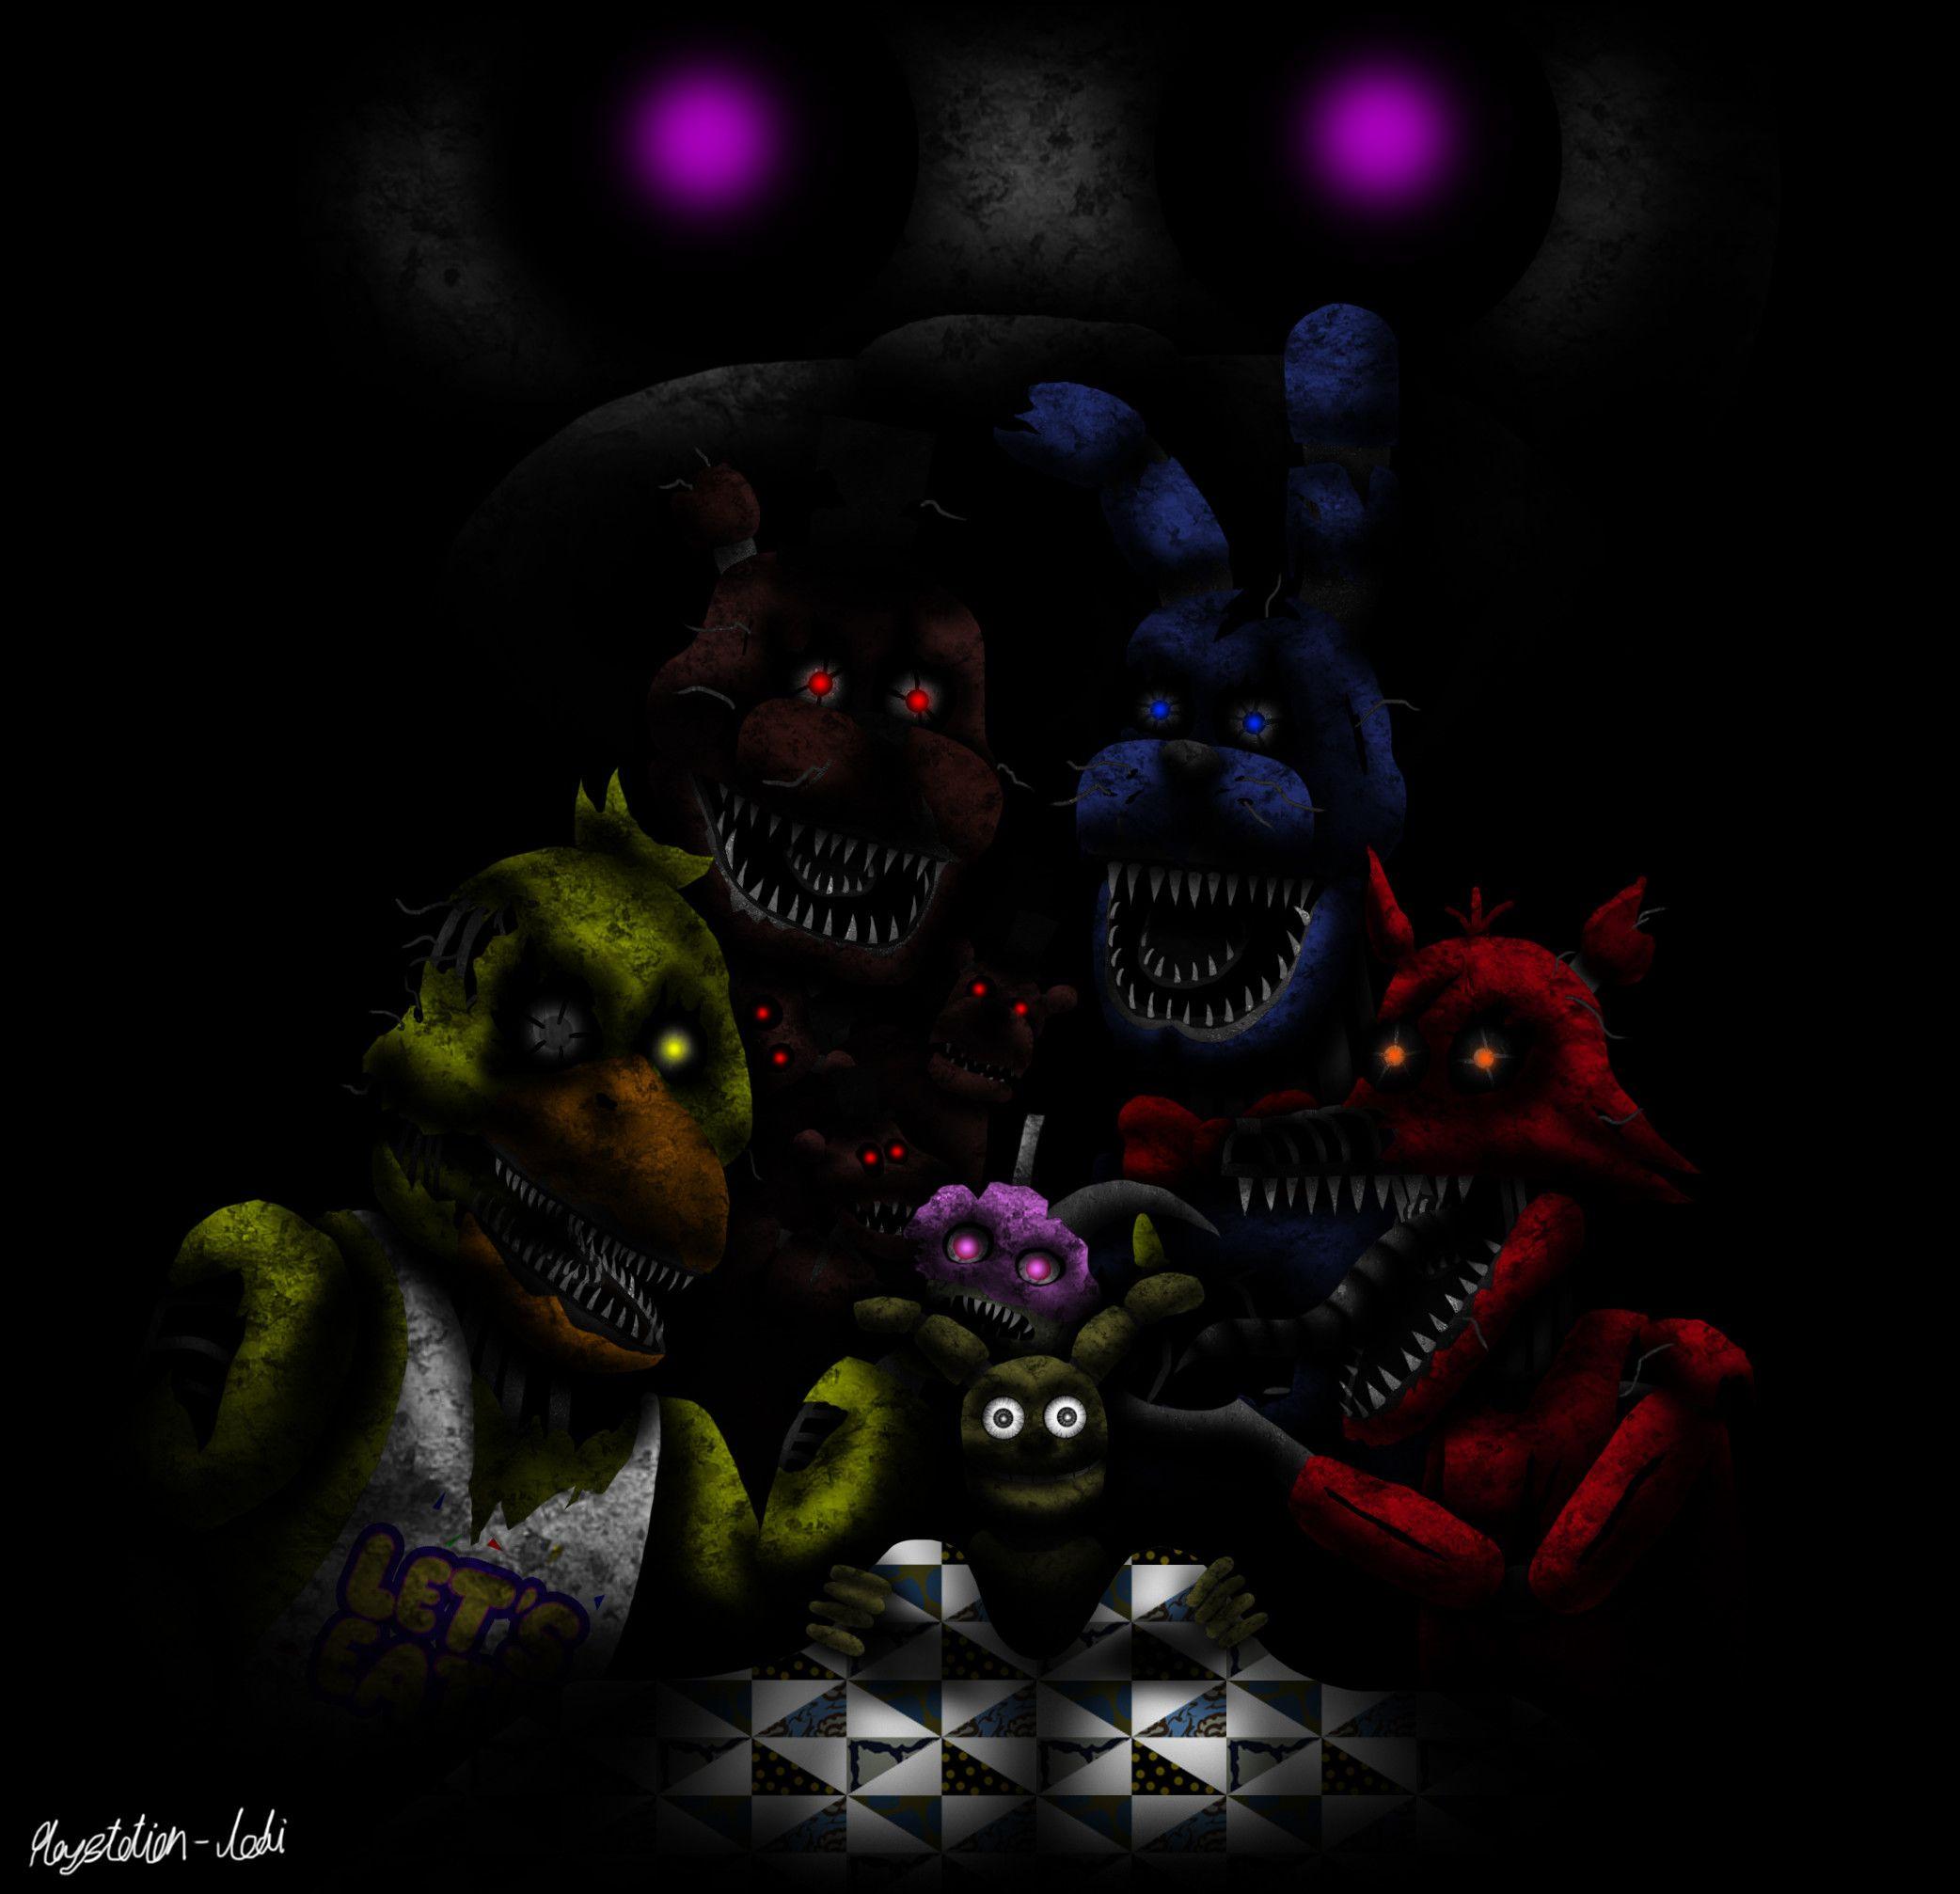 2084 x 2014 · jpeg - Scary FNAF Wallpapers - Wallpaper Cave